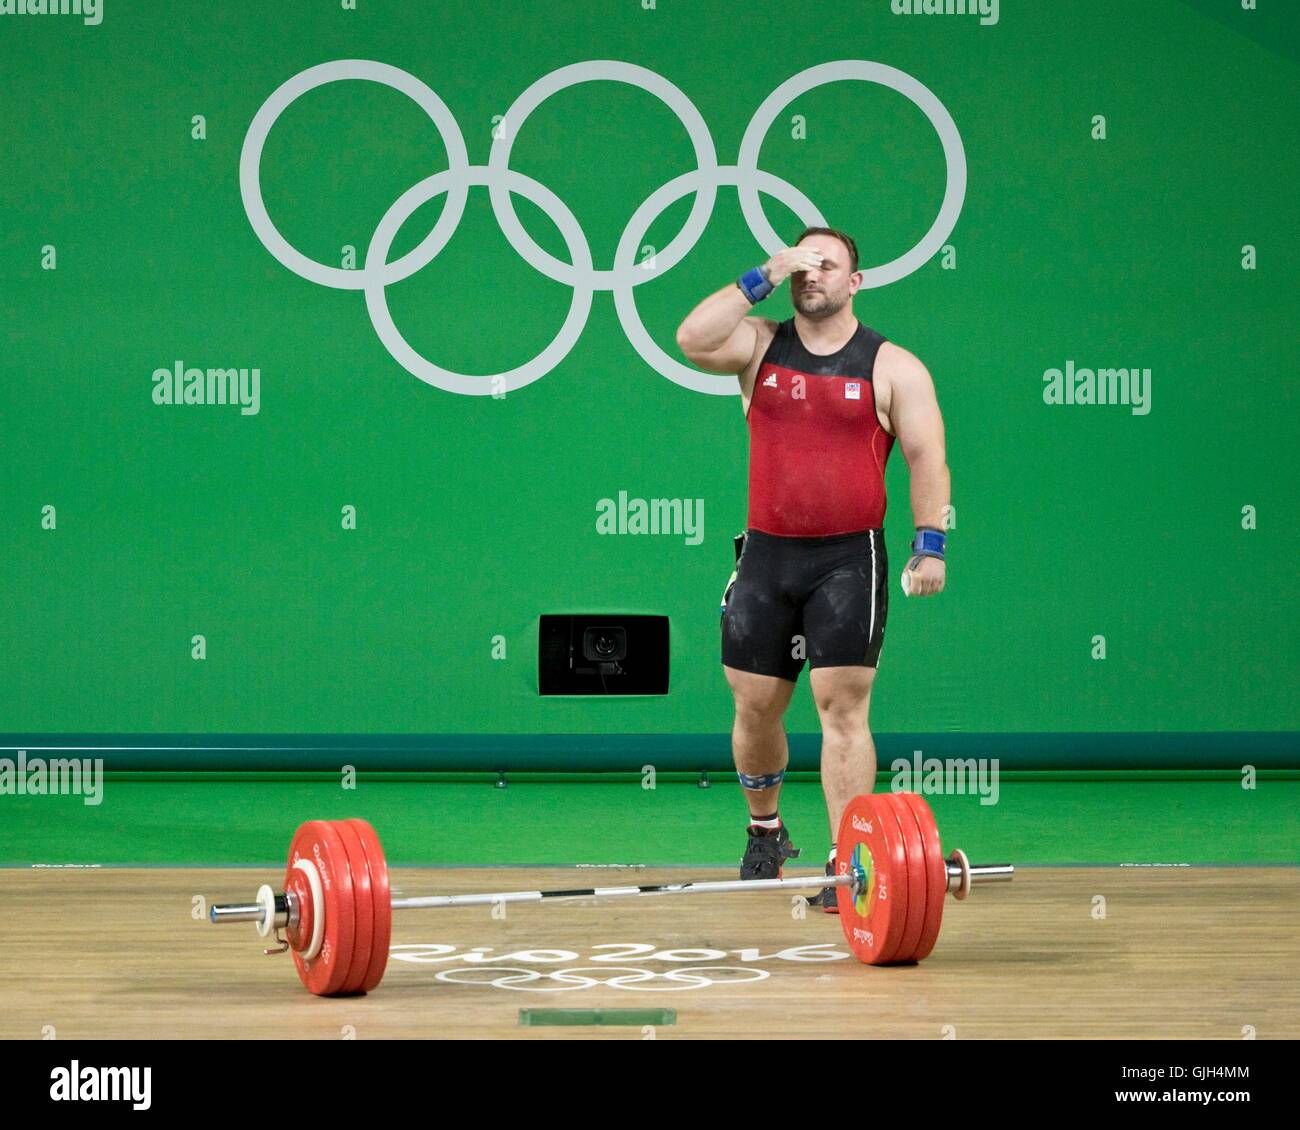 Rio de Janeiro, Brazil. 16th Aug, 2016. JIRI ORSAG of Czech Republic in action during the Men's  105kg weightlifting final at the Rio 2016 Summer Olympic Games. Credit:  Paul Kitagaki Jr./ZUMA Wire/Alamy Live News Stock Photo